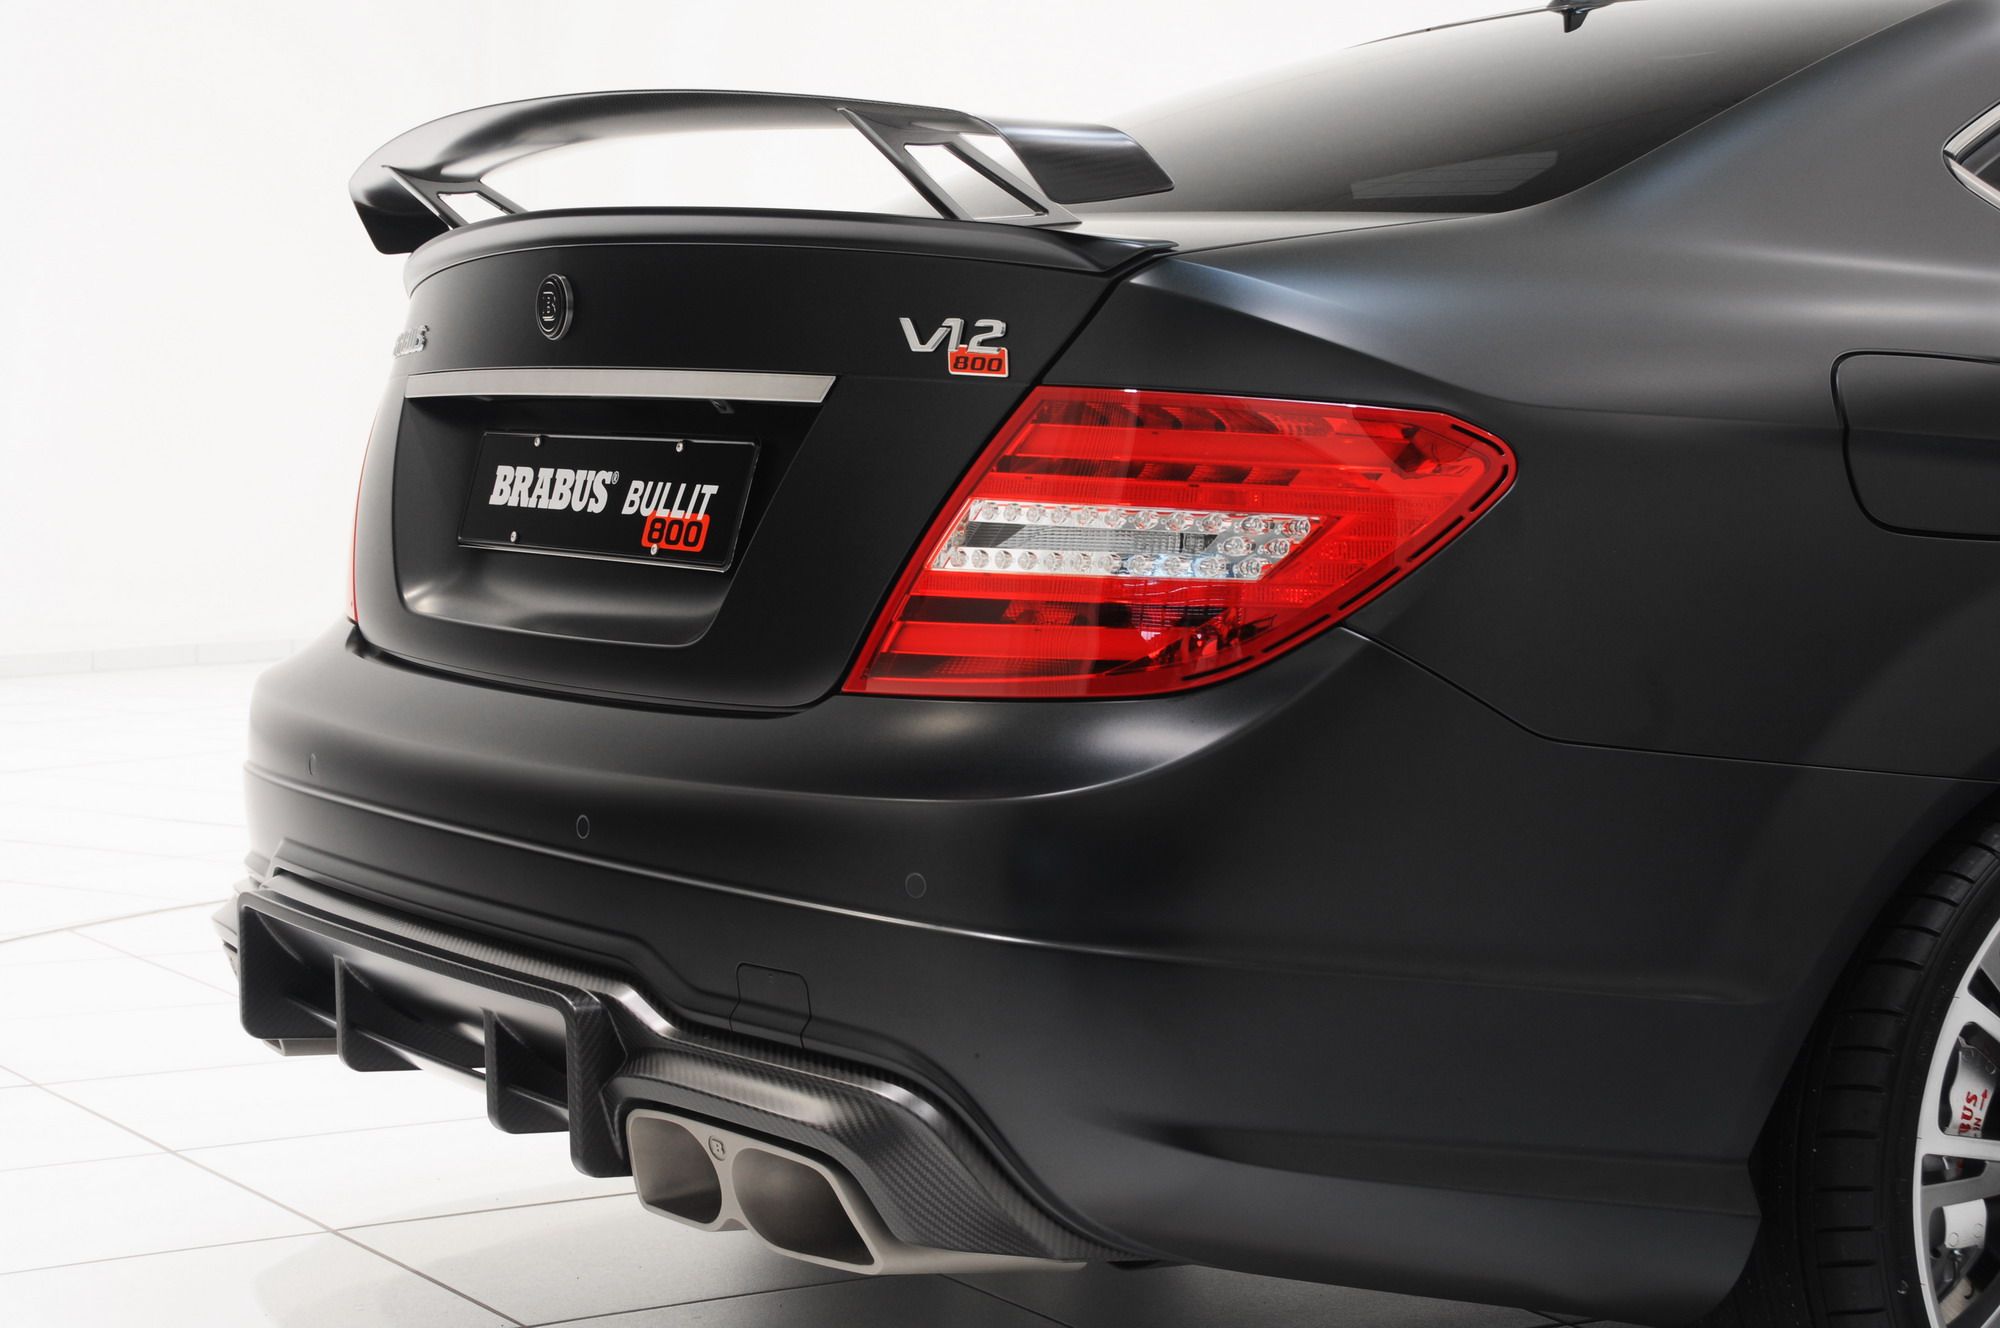 2012 Mercedes C-Class Bullit Coupe by Brabus